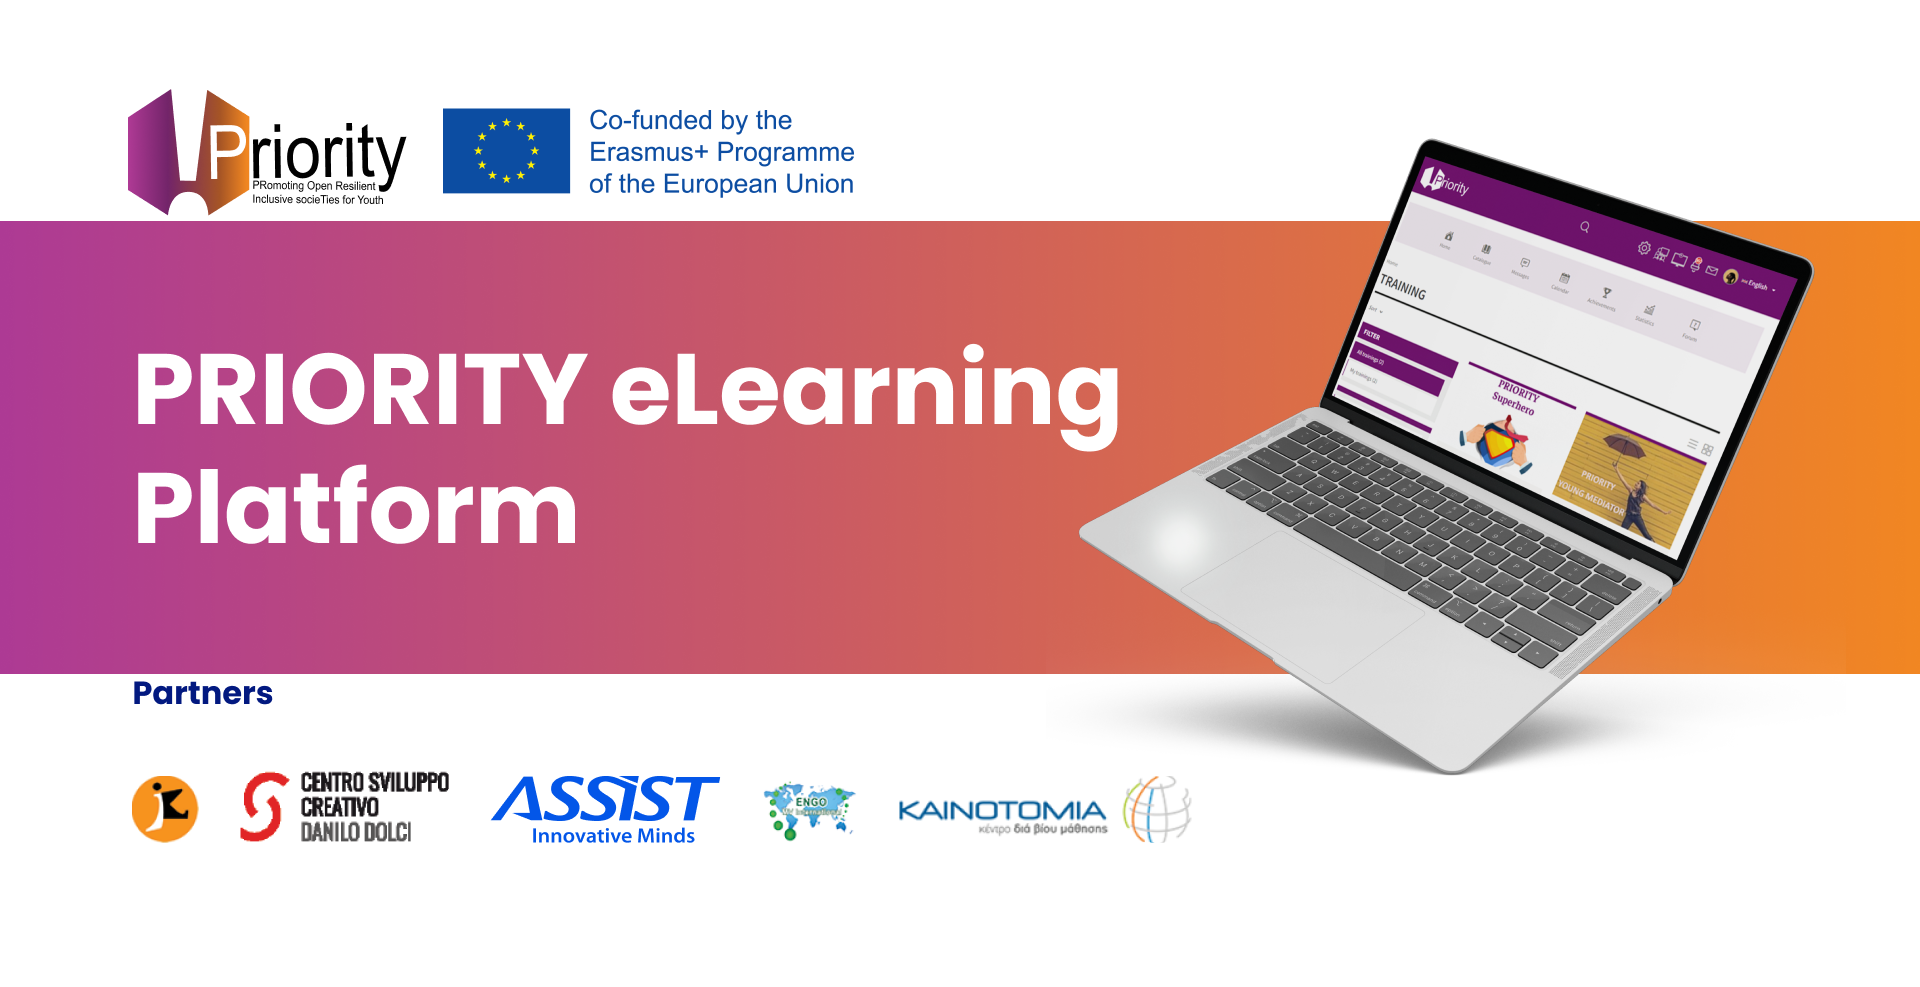 The PRIORITY eLearning Platform is up and running!